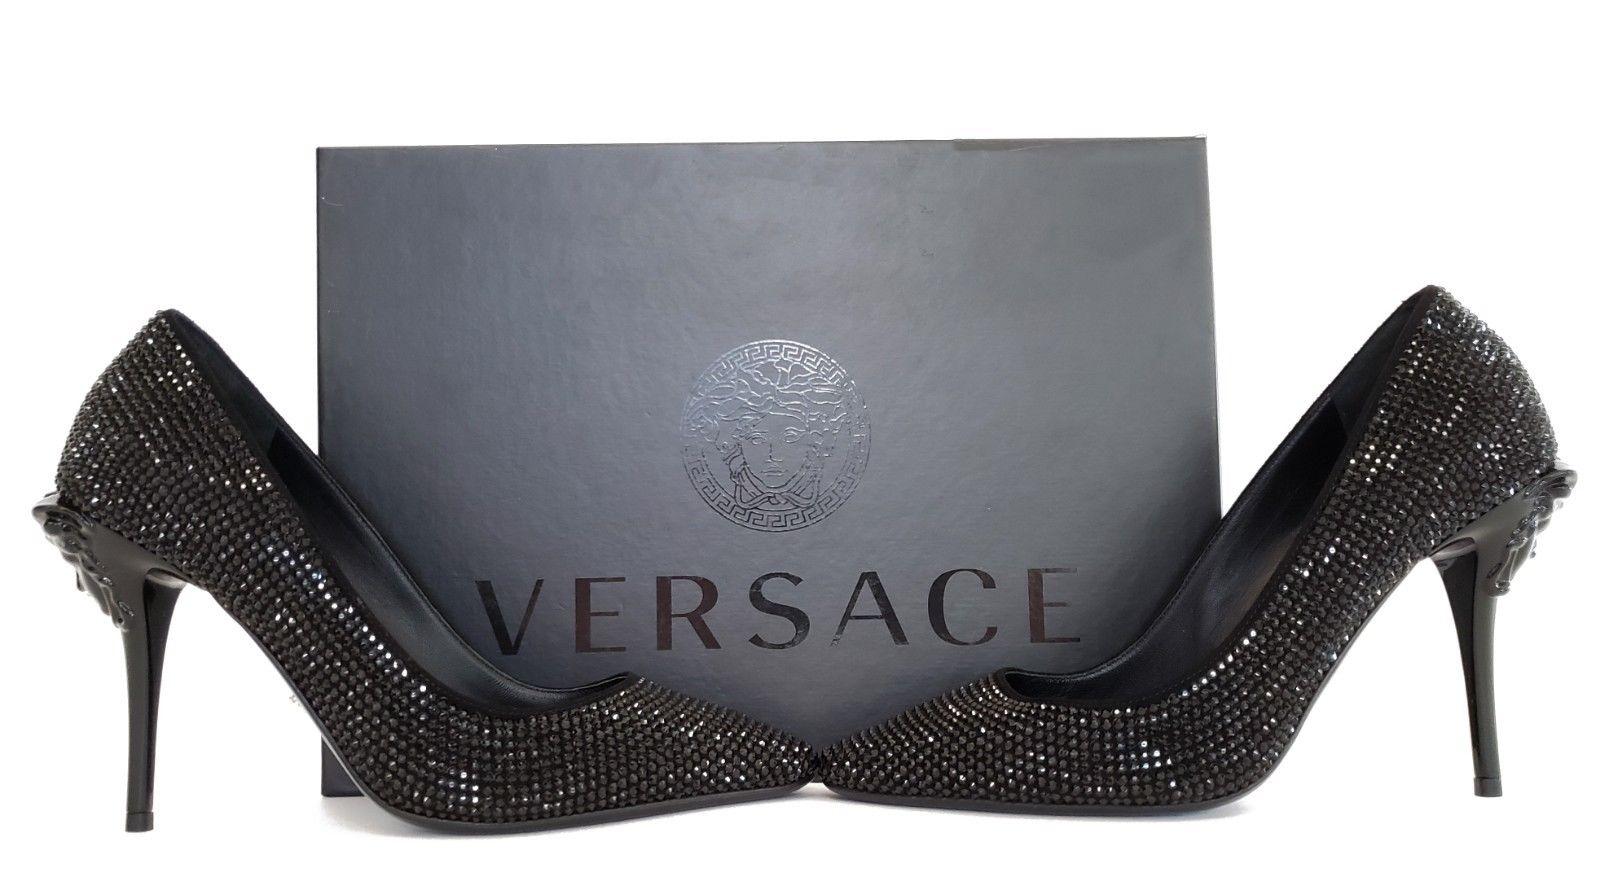 New VERSACE Black Crystal Palazzo Pumps Shoes 37 - 7 In New Condition For Sale In Montgomery, TX